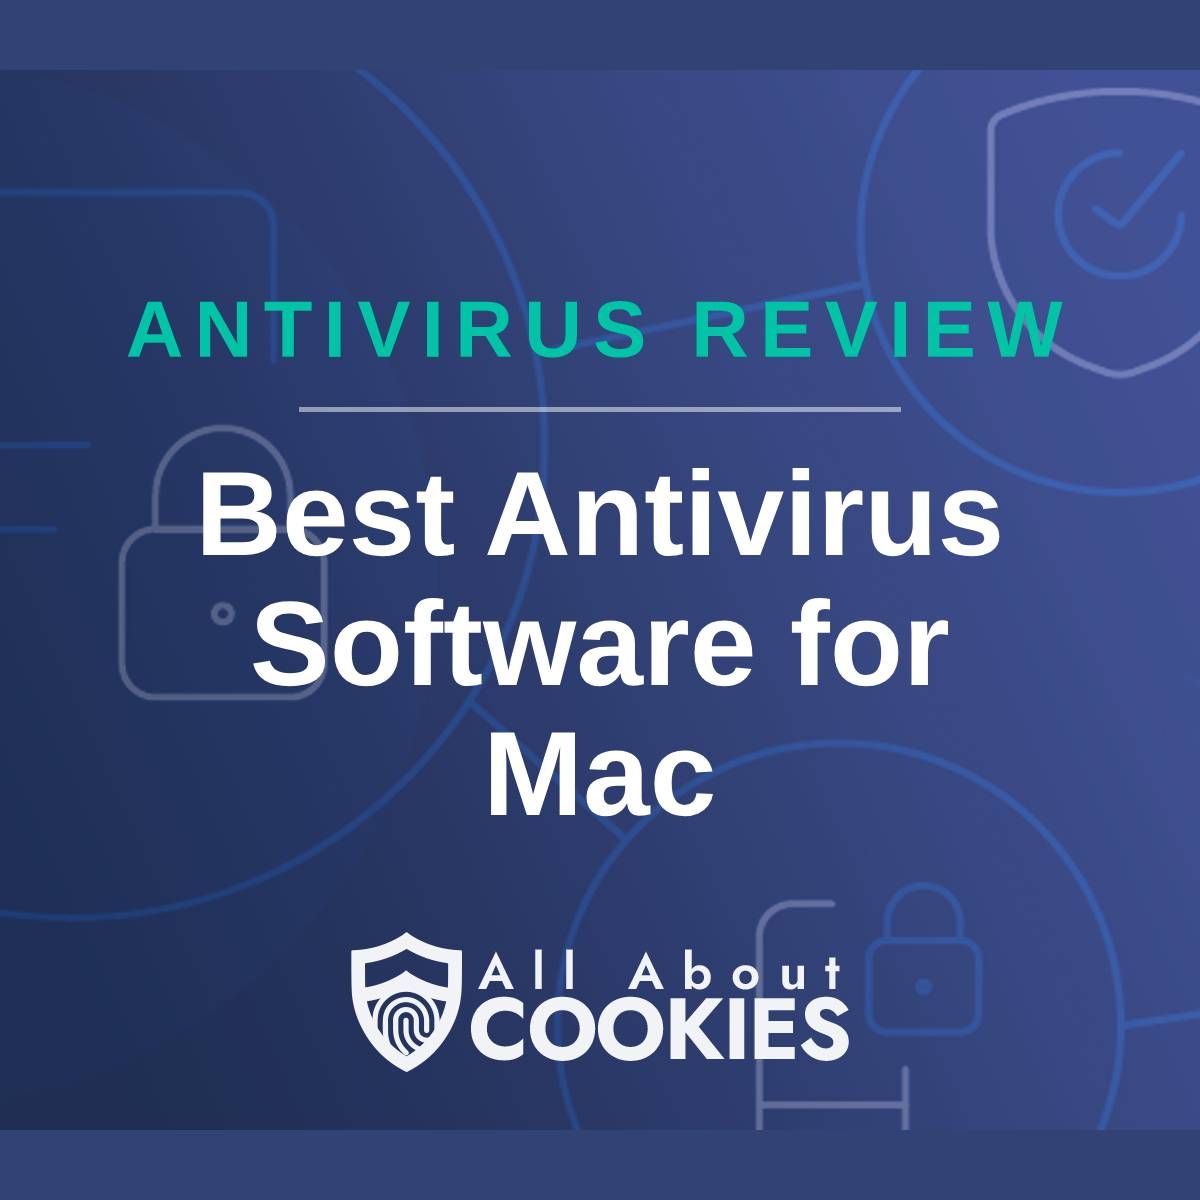 A blue background with images of locks and shields with the text &quot;Antivirus Review Best Antivirus Software for Mac&quot; and the All About Cookies logo. 